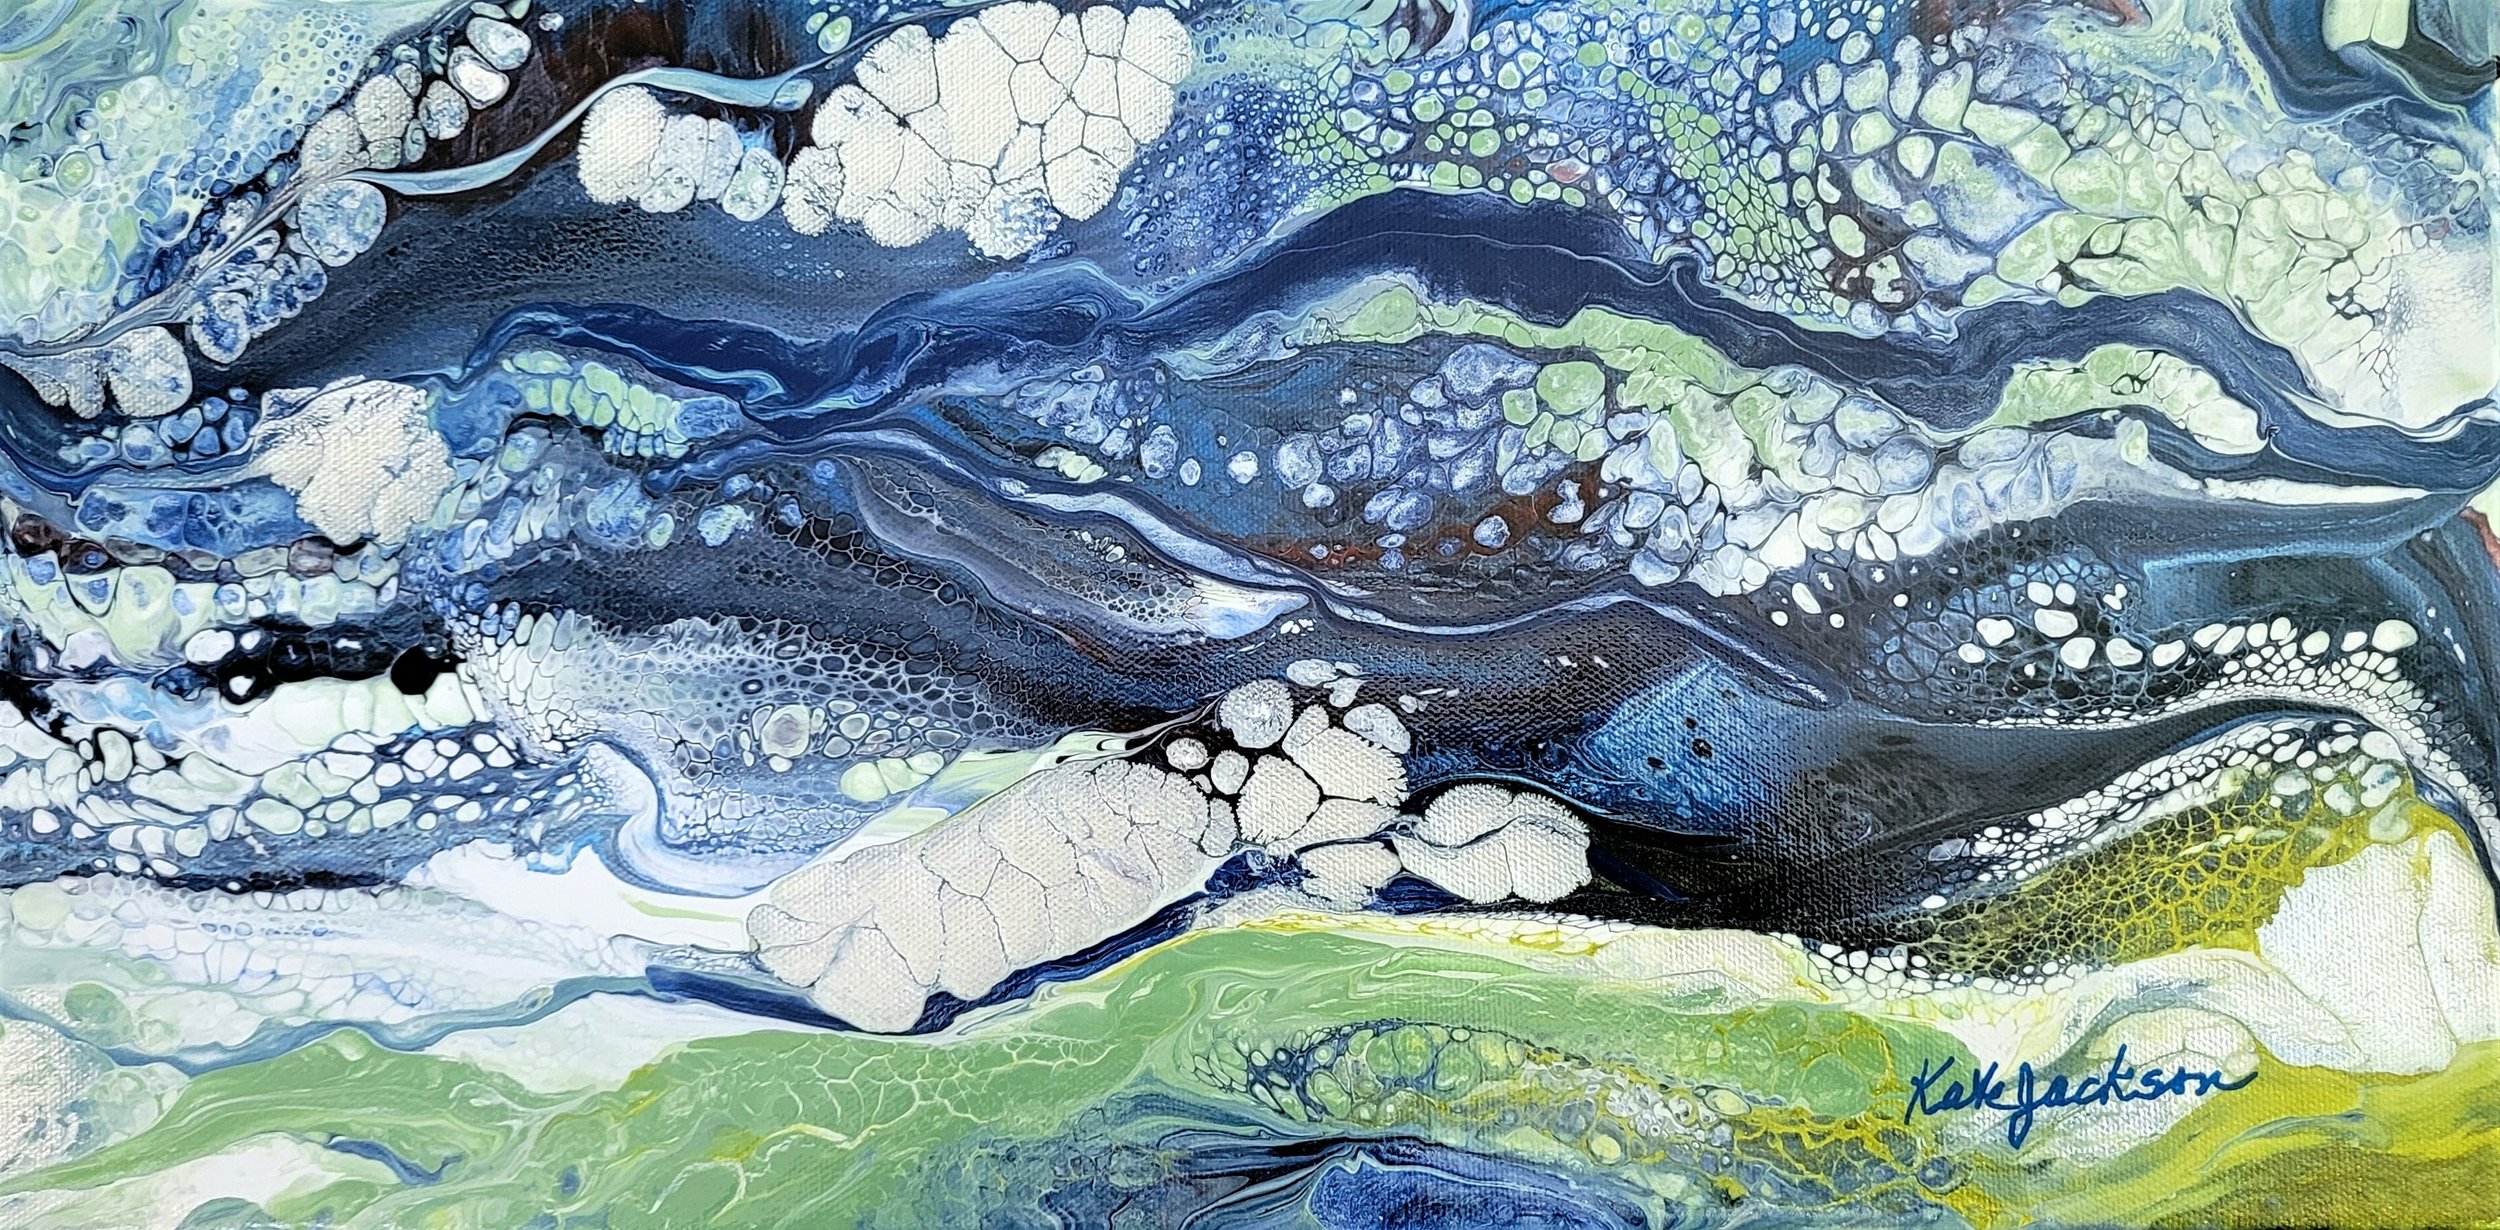 Acrylic Pour Painting with Schmincke Pouring Medium and Inks - Jackson's  Art Blog